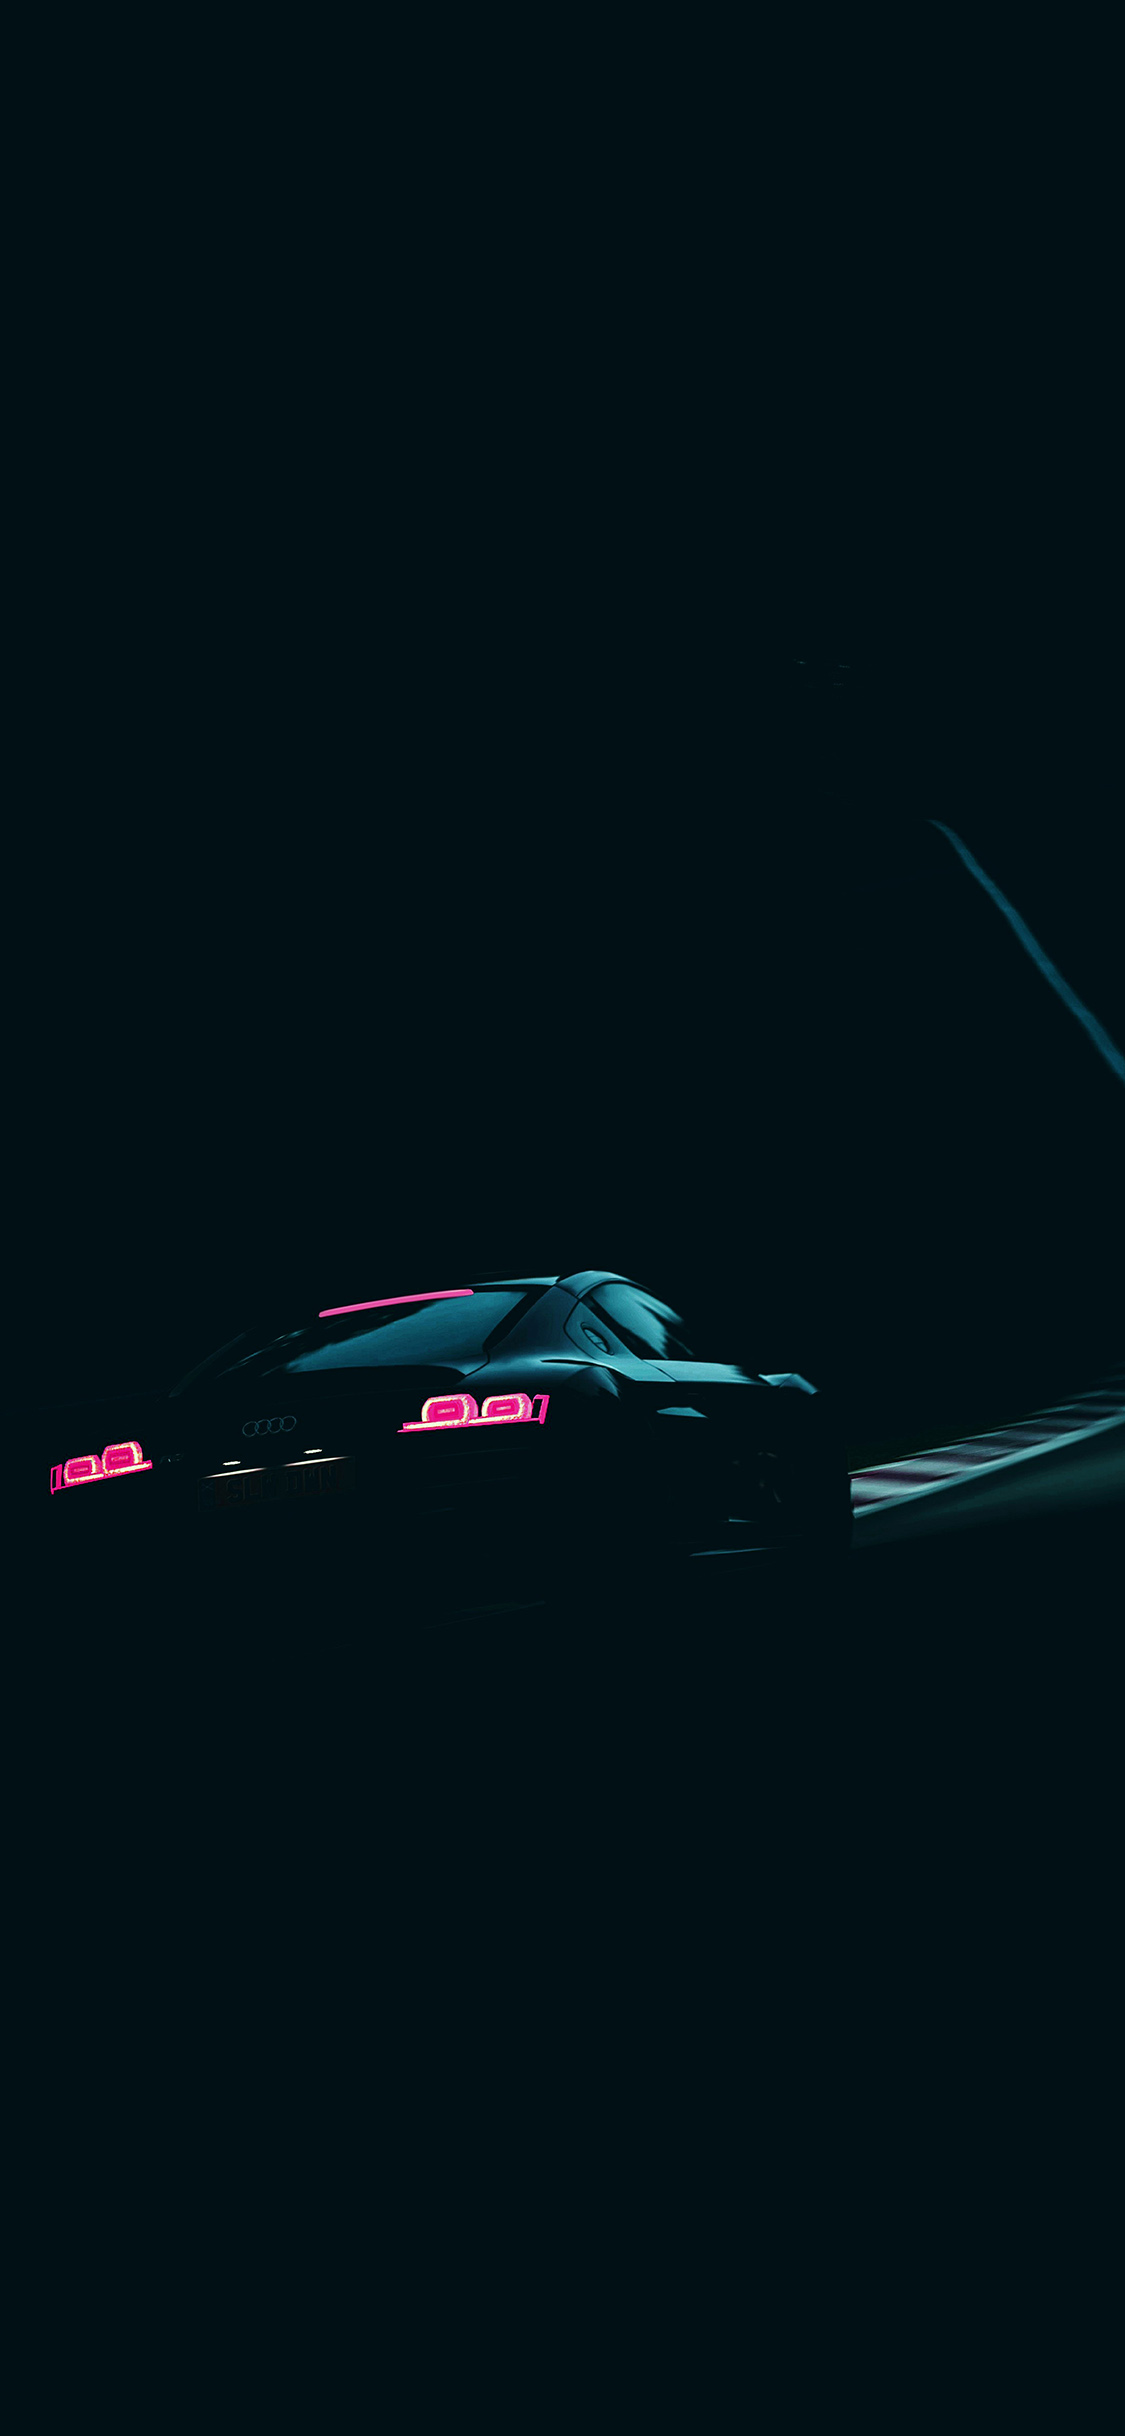 Cars Wallpapers For Iphone X Iphonexpapers 4k Wallpaper For Iphone Xs